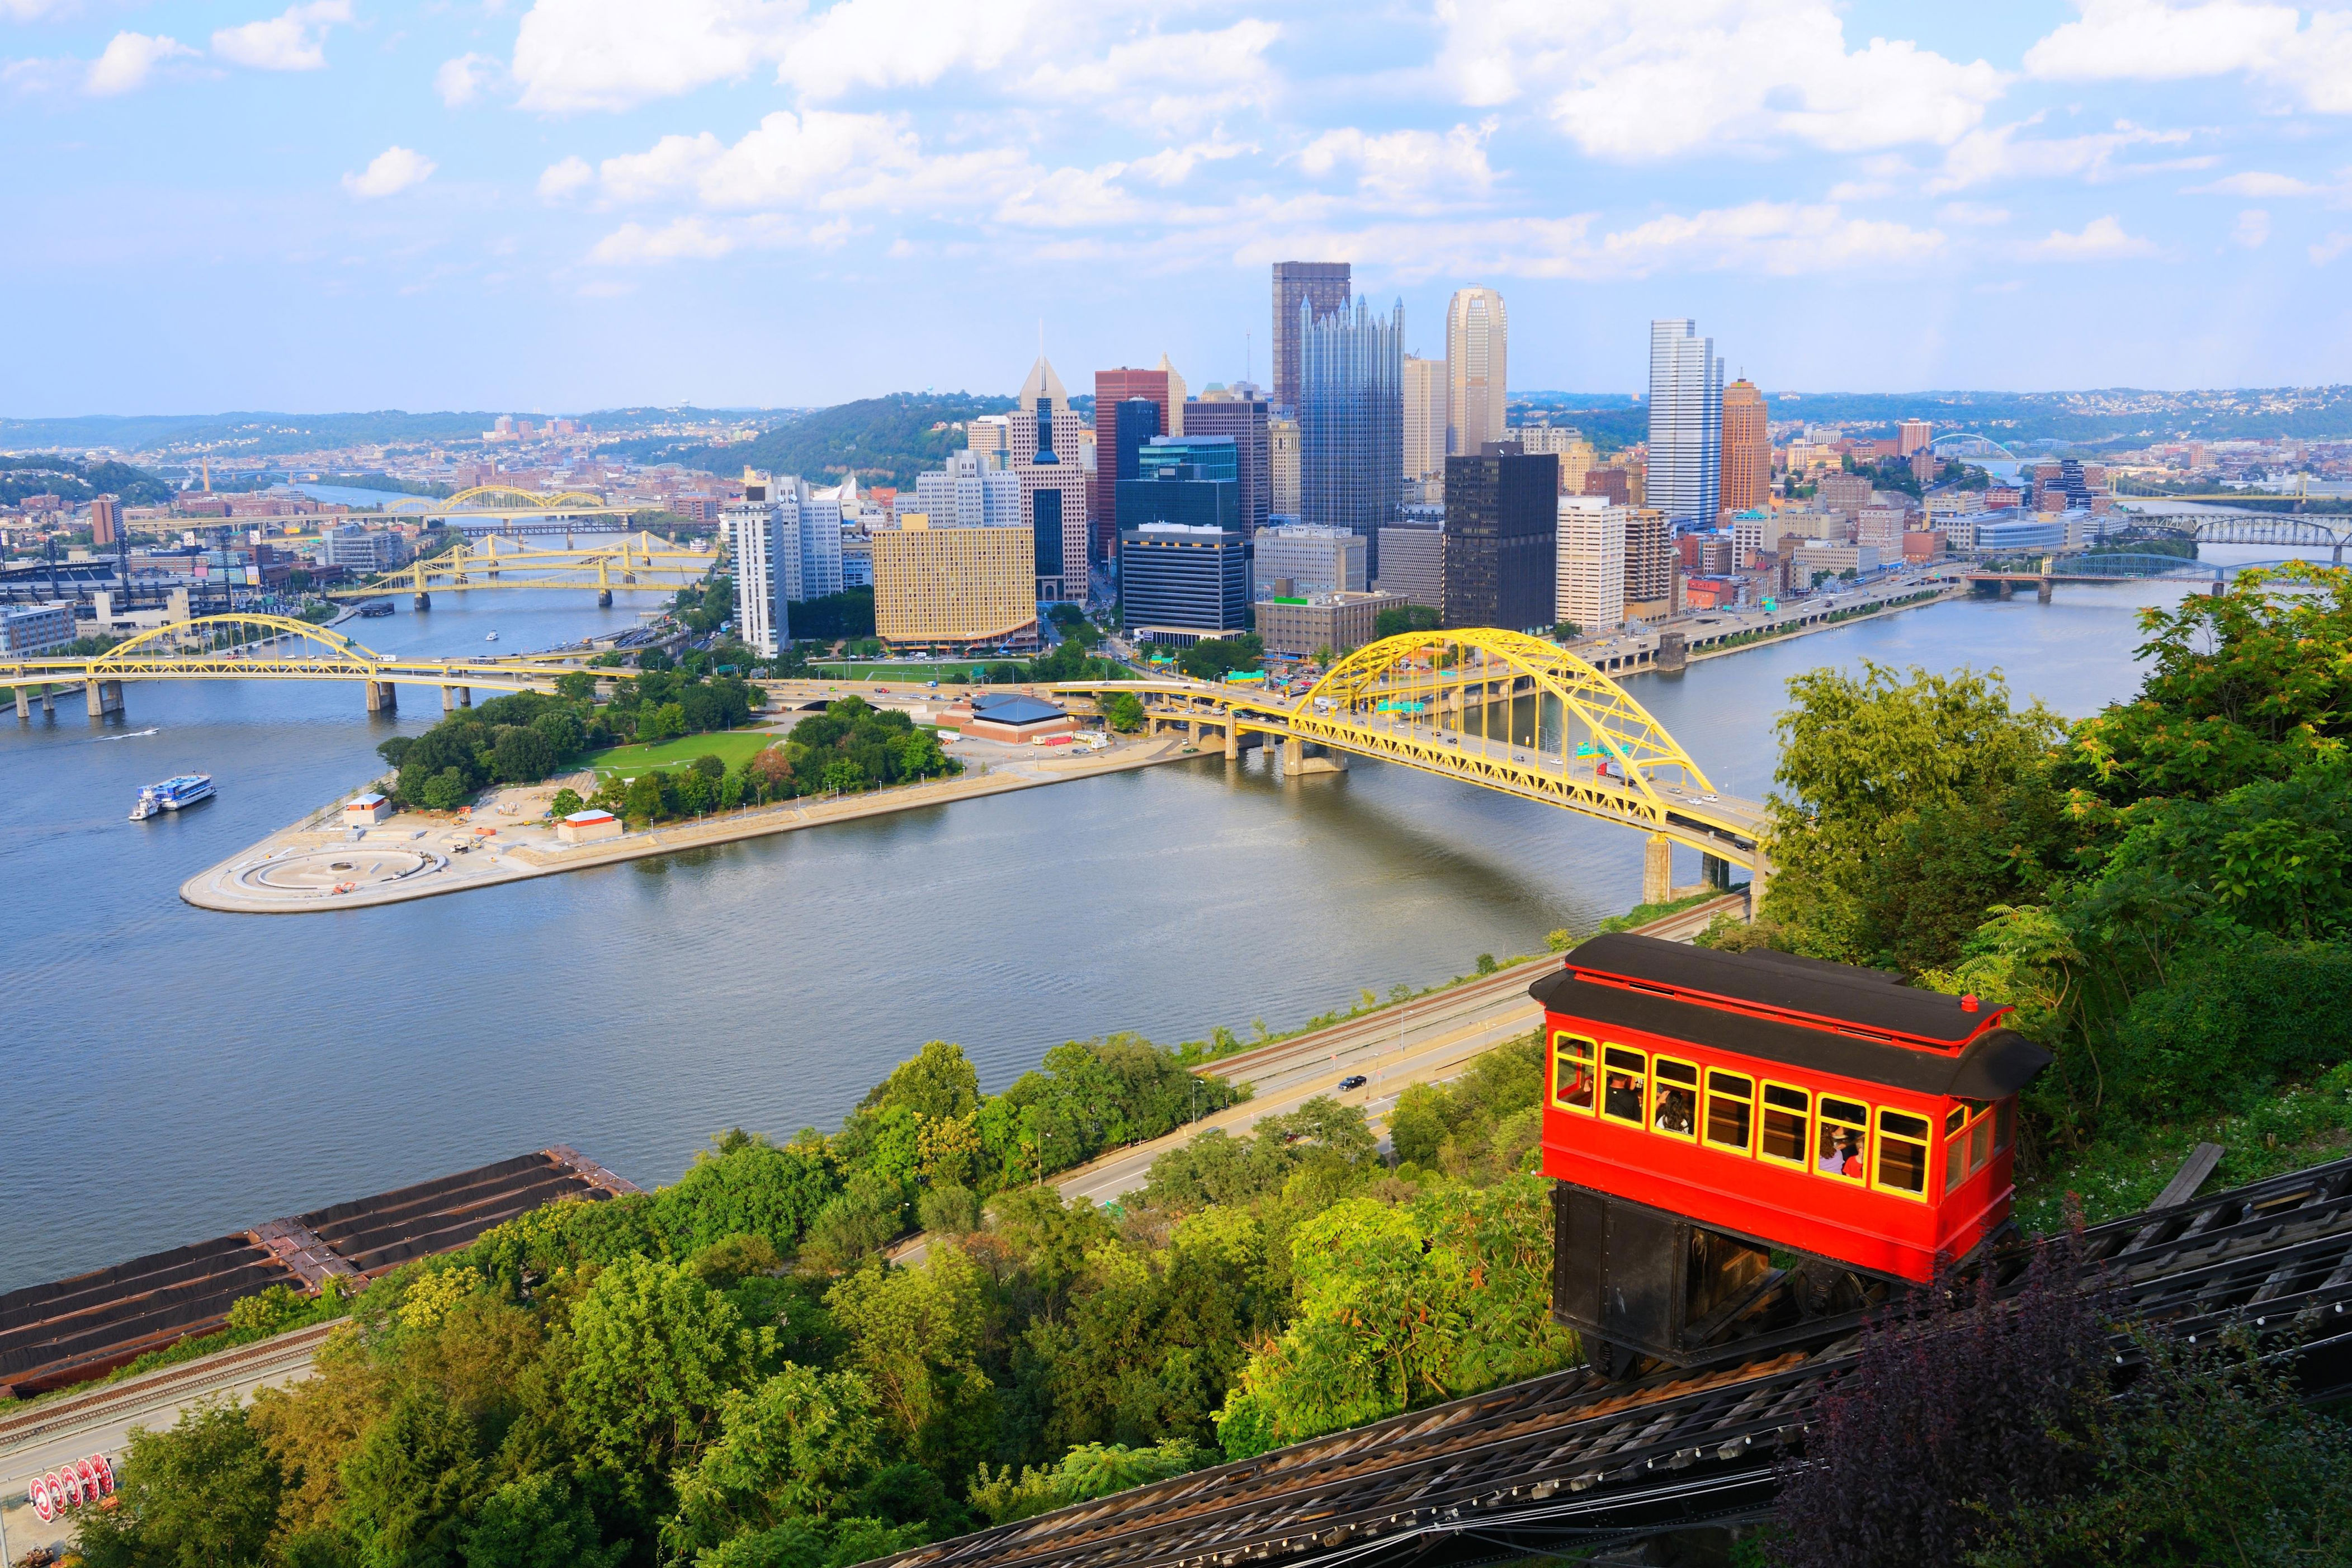 <p>Pennsylvania is brimming with history (does the Liberty Bell, well, ring a bell?), but a scenic landscape might be the best setting for a selfie in the Keystone State. Set up a shot on Mount Washington, overlooking Pittsburgh. From this vantage point, you can put yourself in front of the city's skyline and surrounding natural beauty.</p>